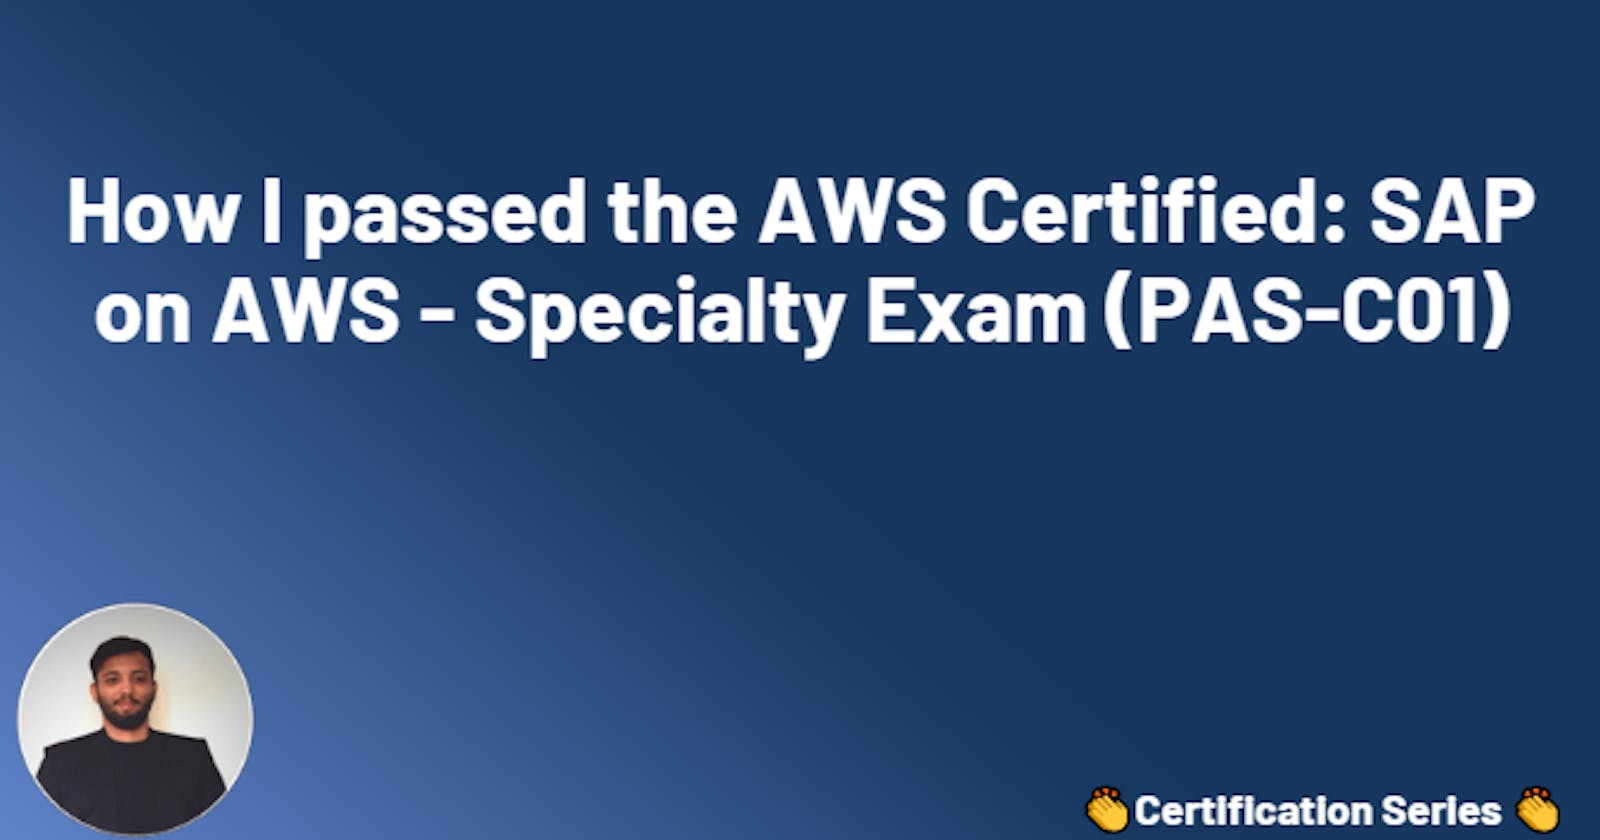 How I passed the AWS Certified: SAP on AWS - Specialty Exam (PAS-C01)